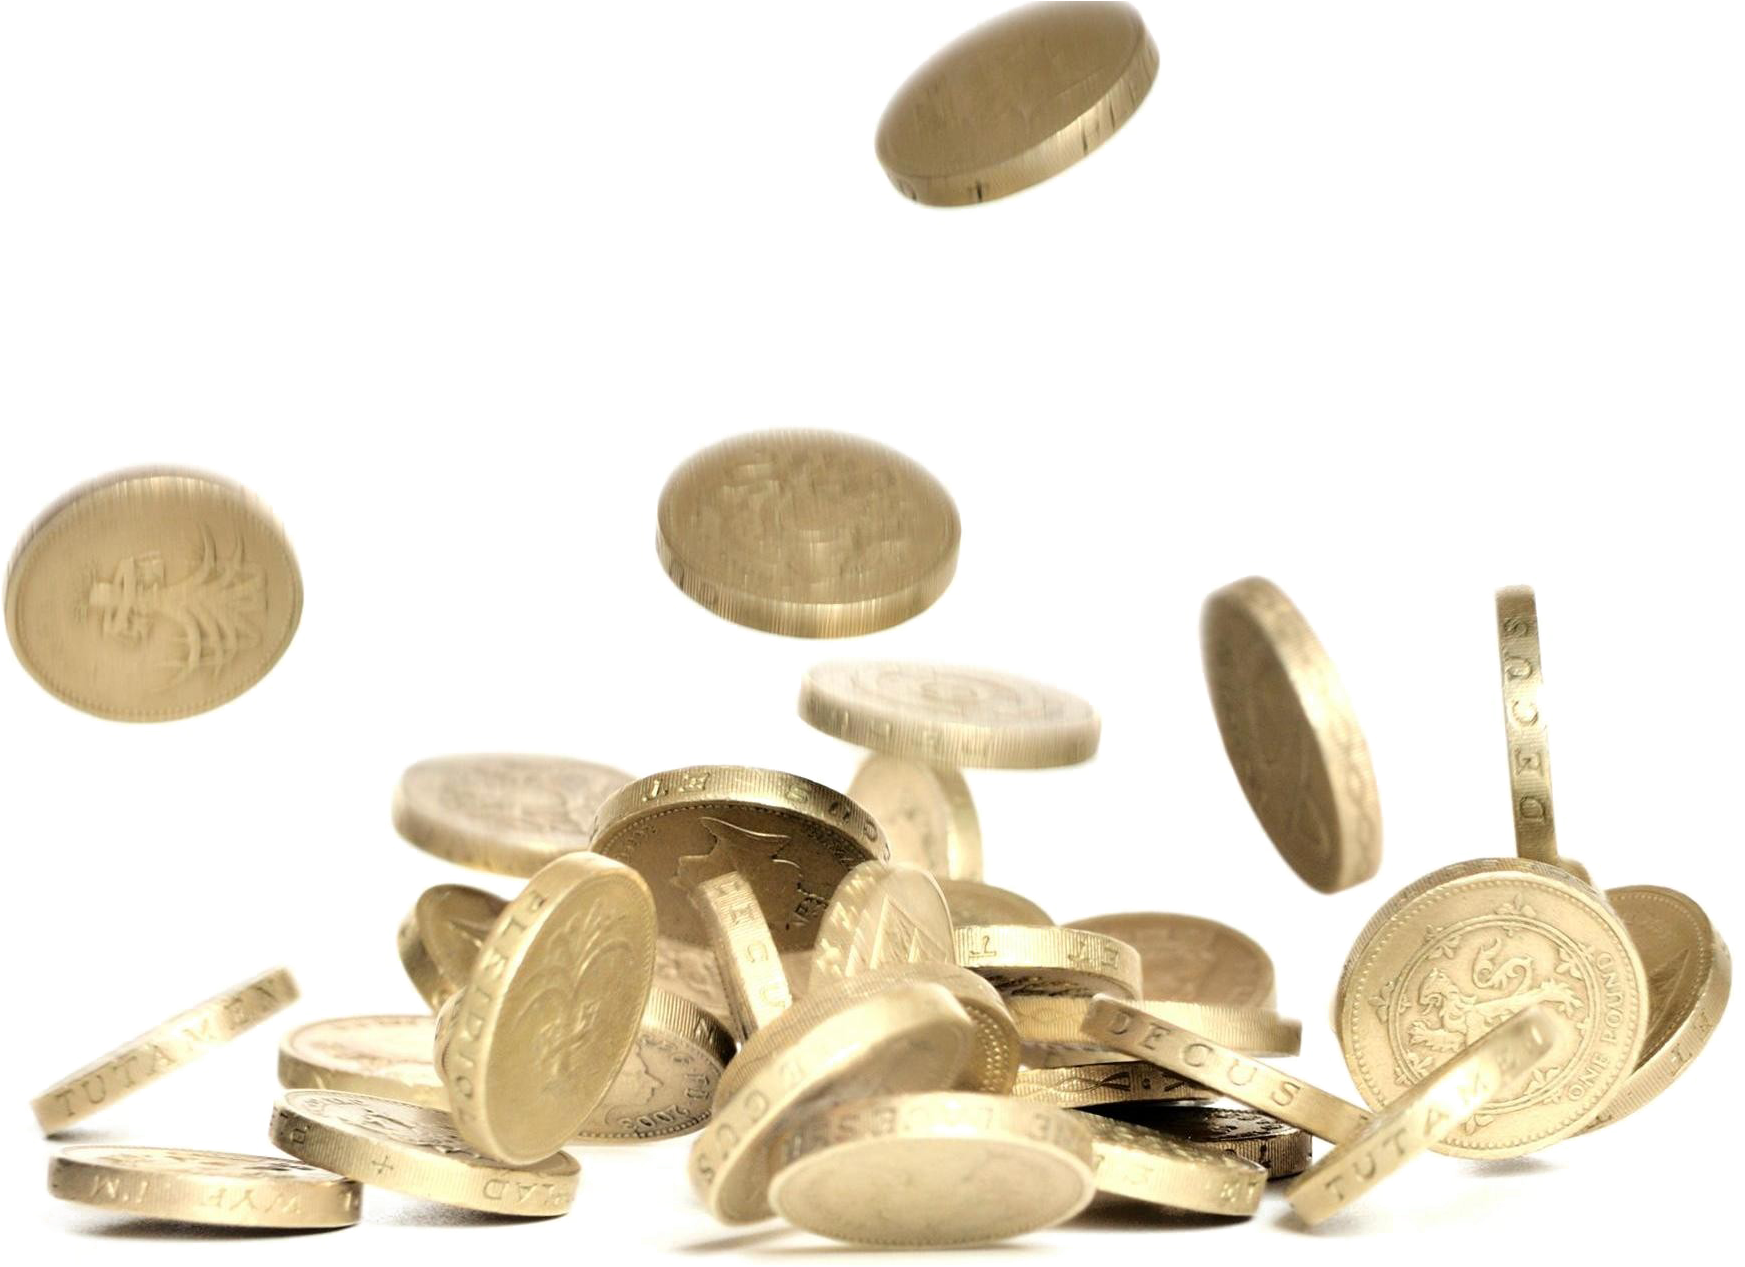 Falling Coins Png Background Image - Indian Coins Falling Png (2250x1266), Png Download